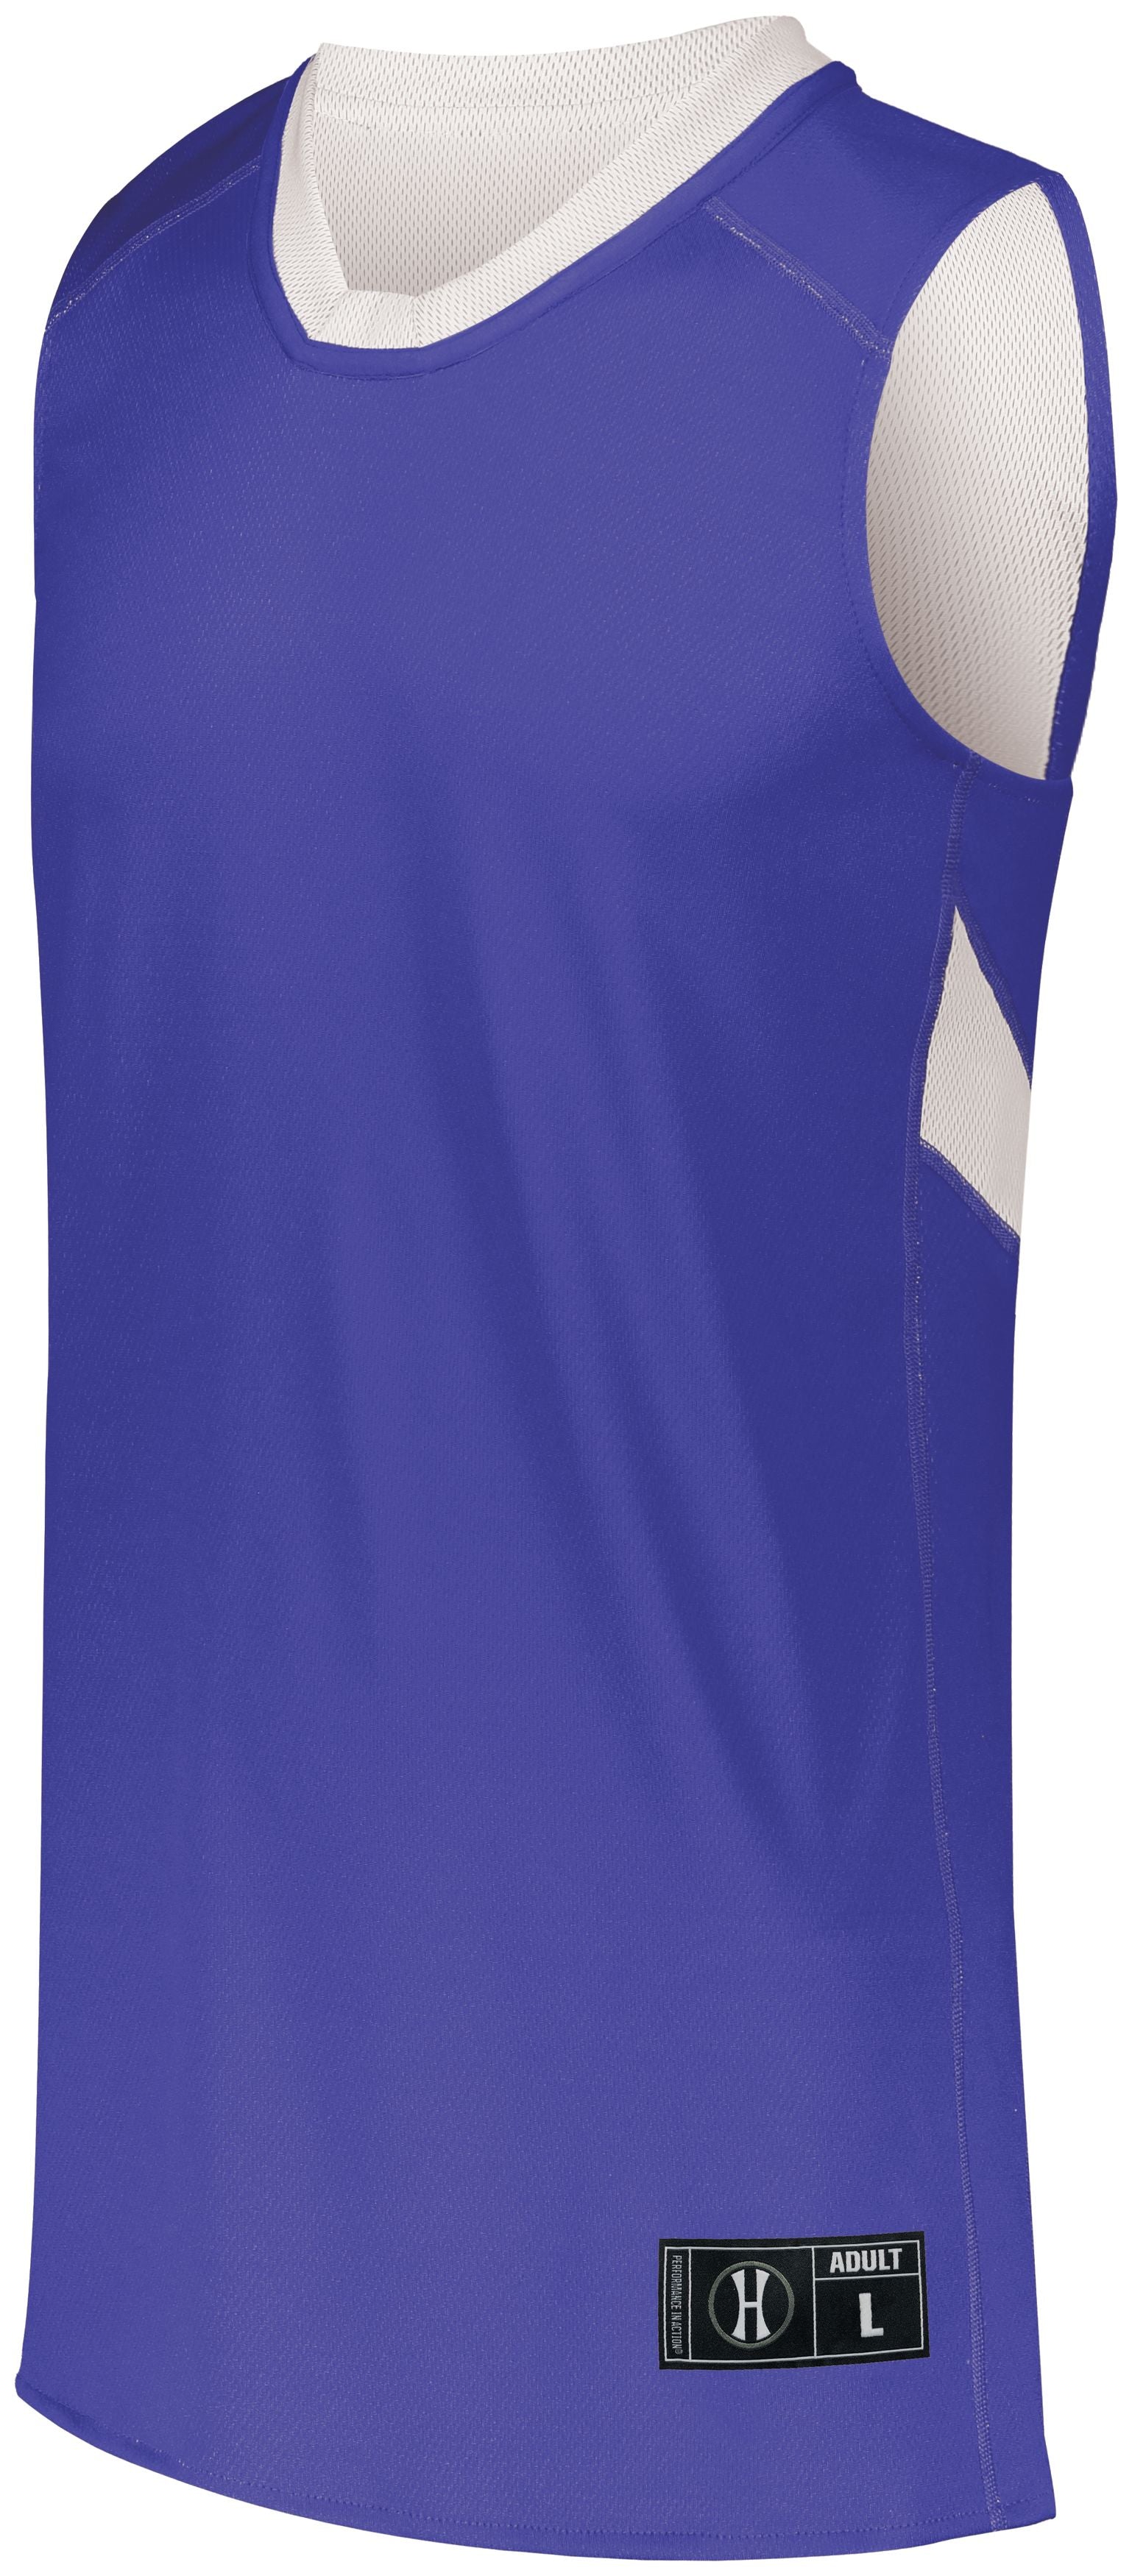 Holloway Dual-Side Single Ply Basketball Jersey in Purple/White  -Part of the Adult, Adult-Jersey, Basketball, Holloway, Shirts, All-Sports, All-Sports-1 product lines at KanaleyCreations.com